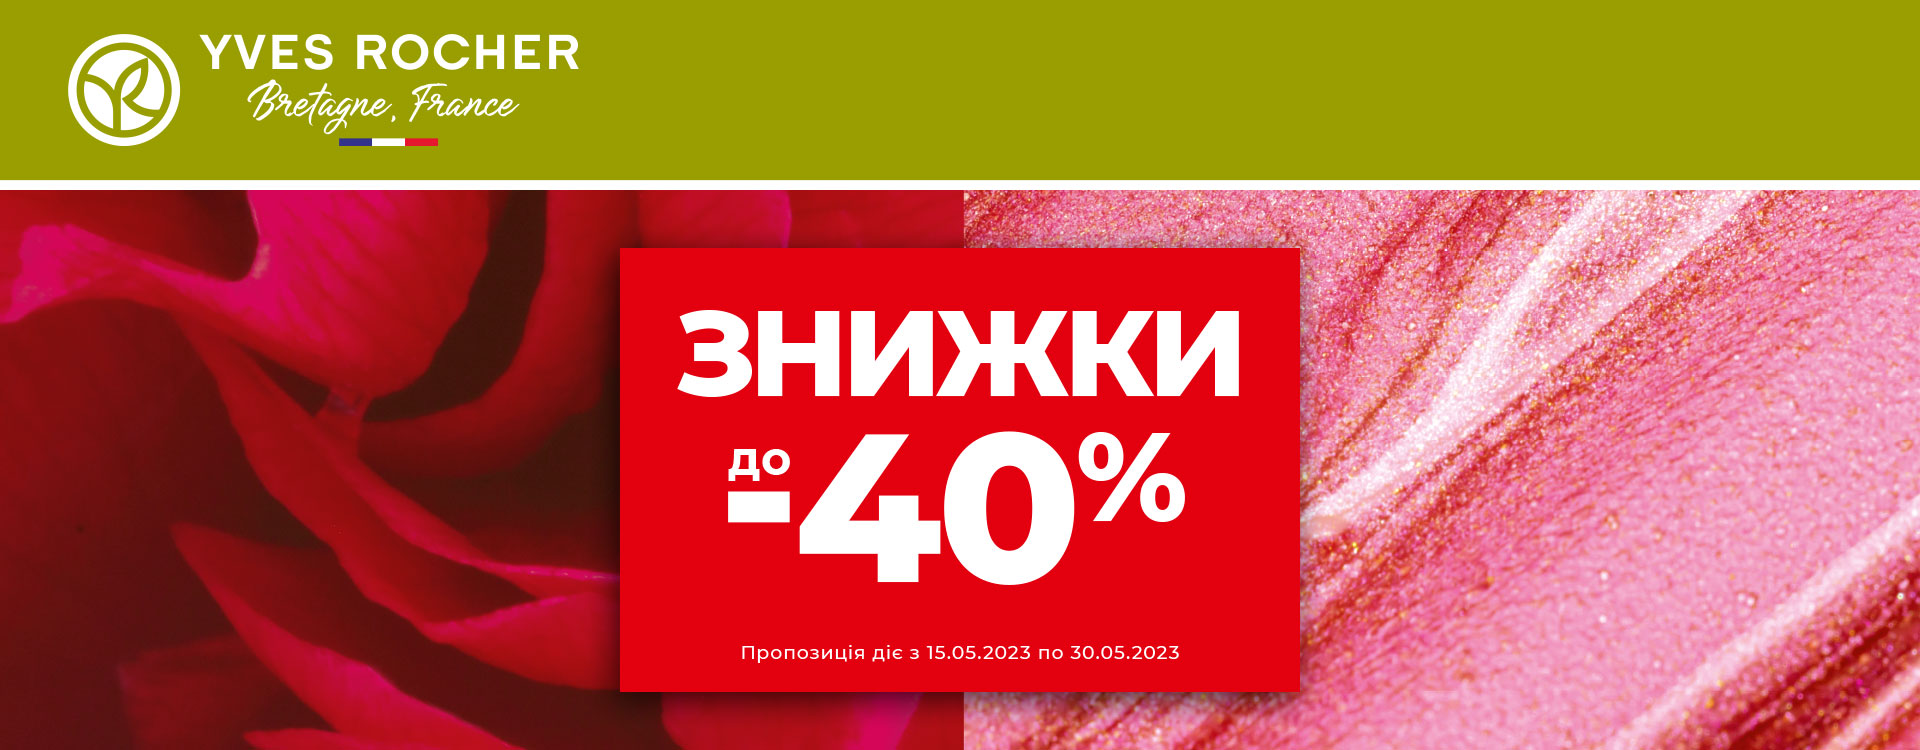 Discounts up to -40% and gifts at Yves Rocher